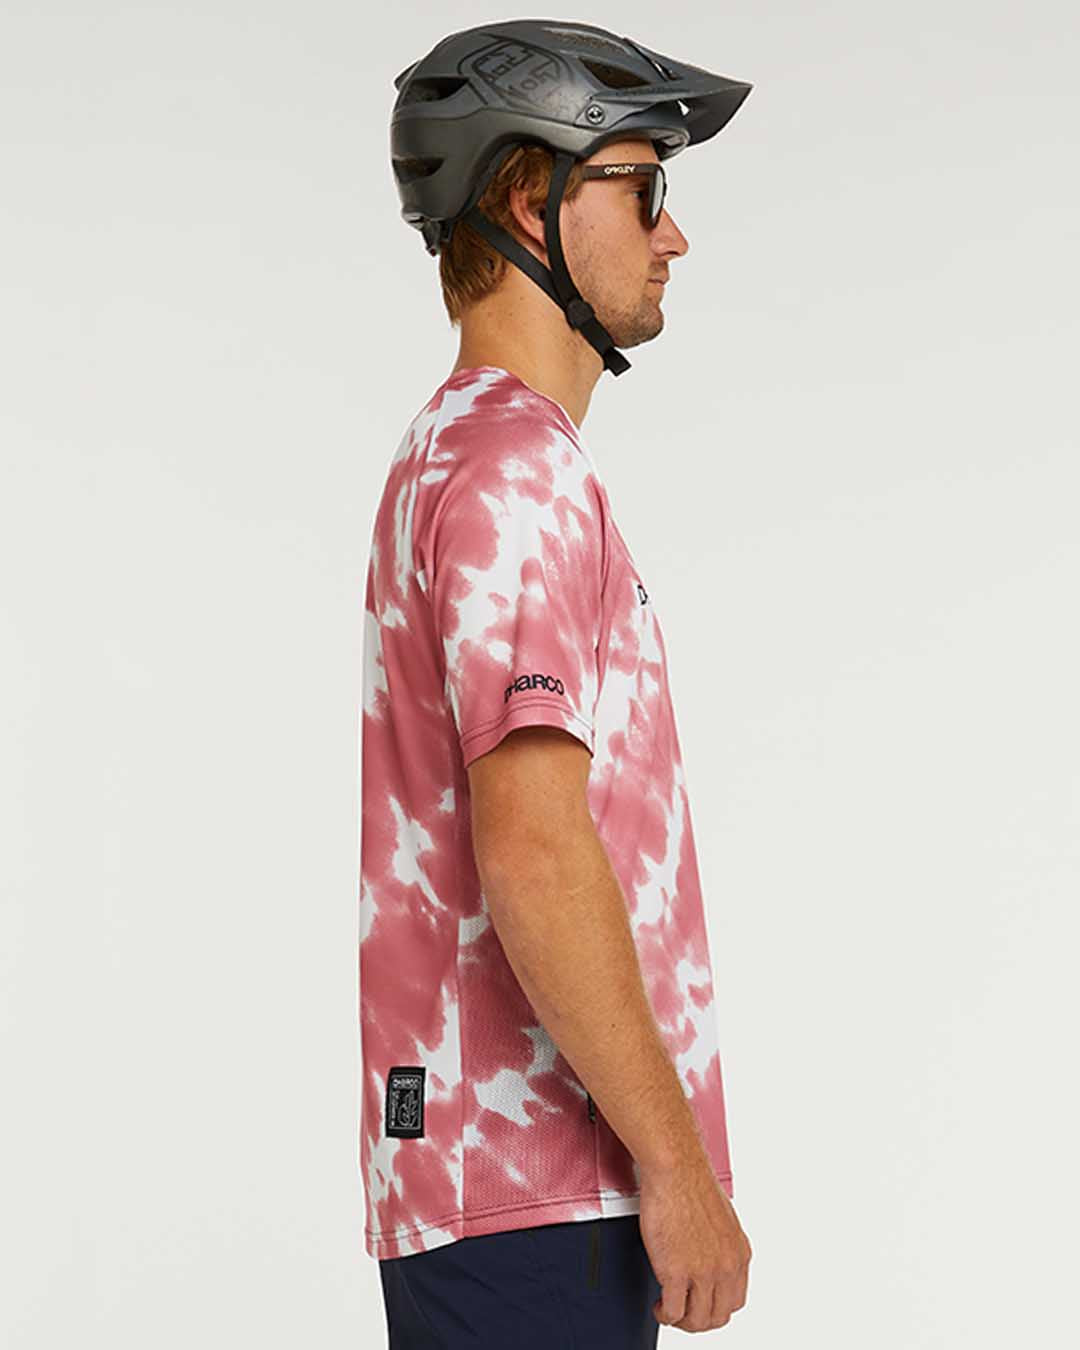 Mens Short Sleeve Jersey | Wipeout